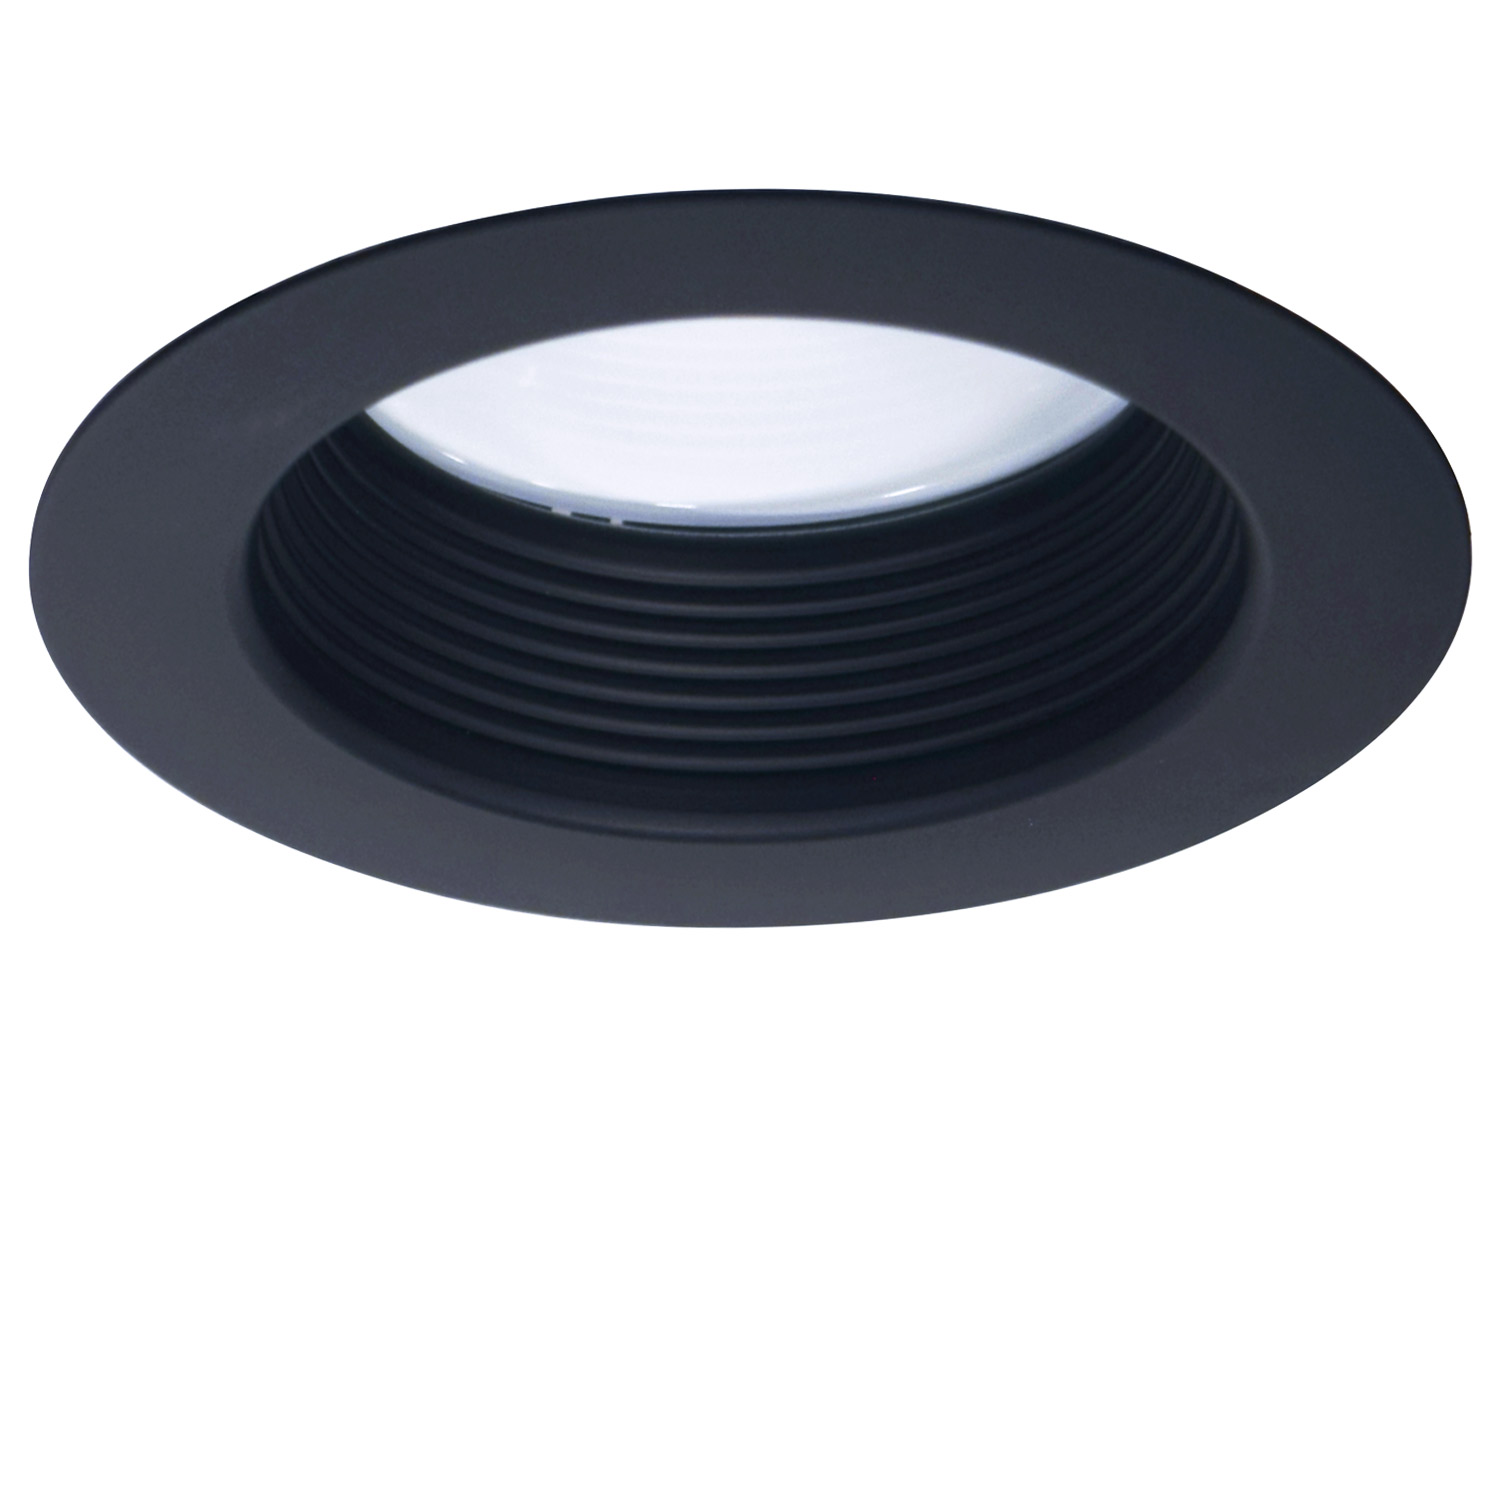 Product image for R6 Series Two Piece Reflector with Lower Baffle and Flat Lens